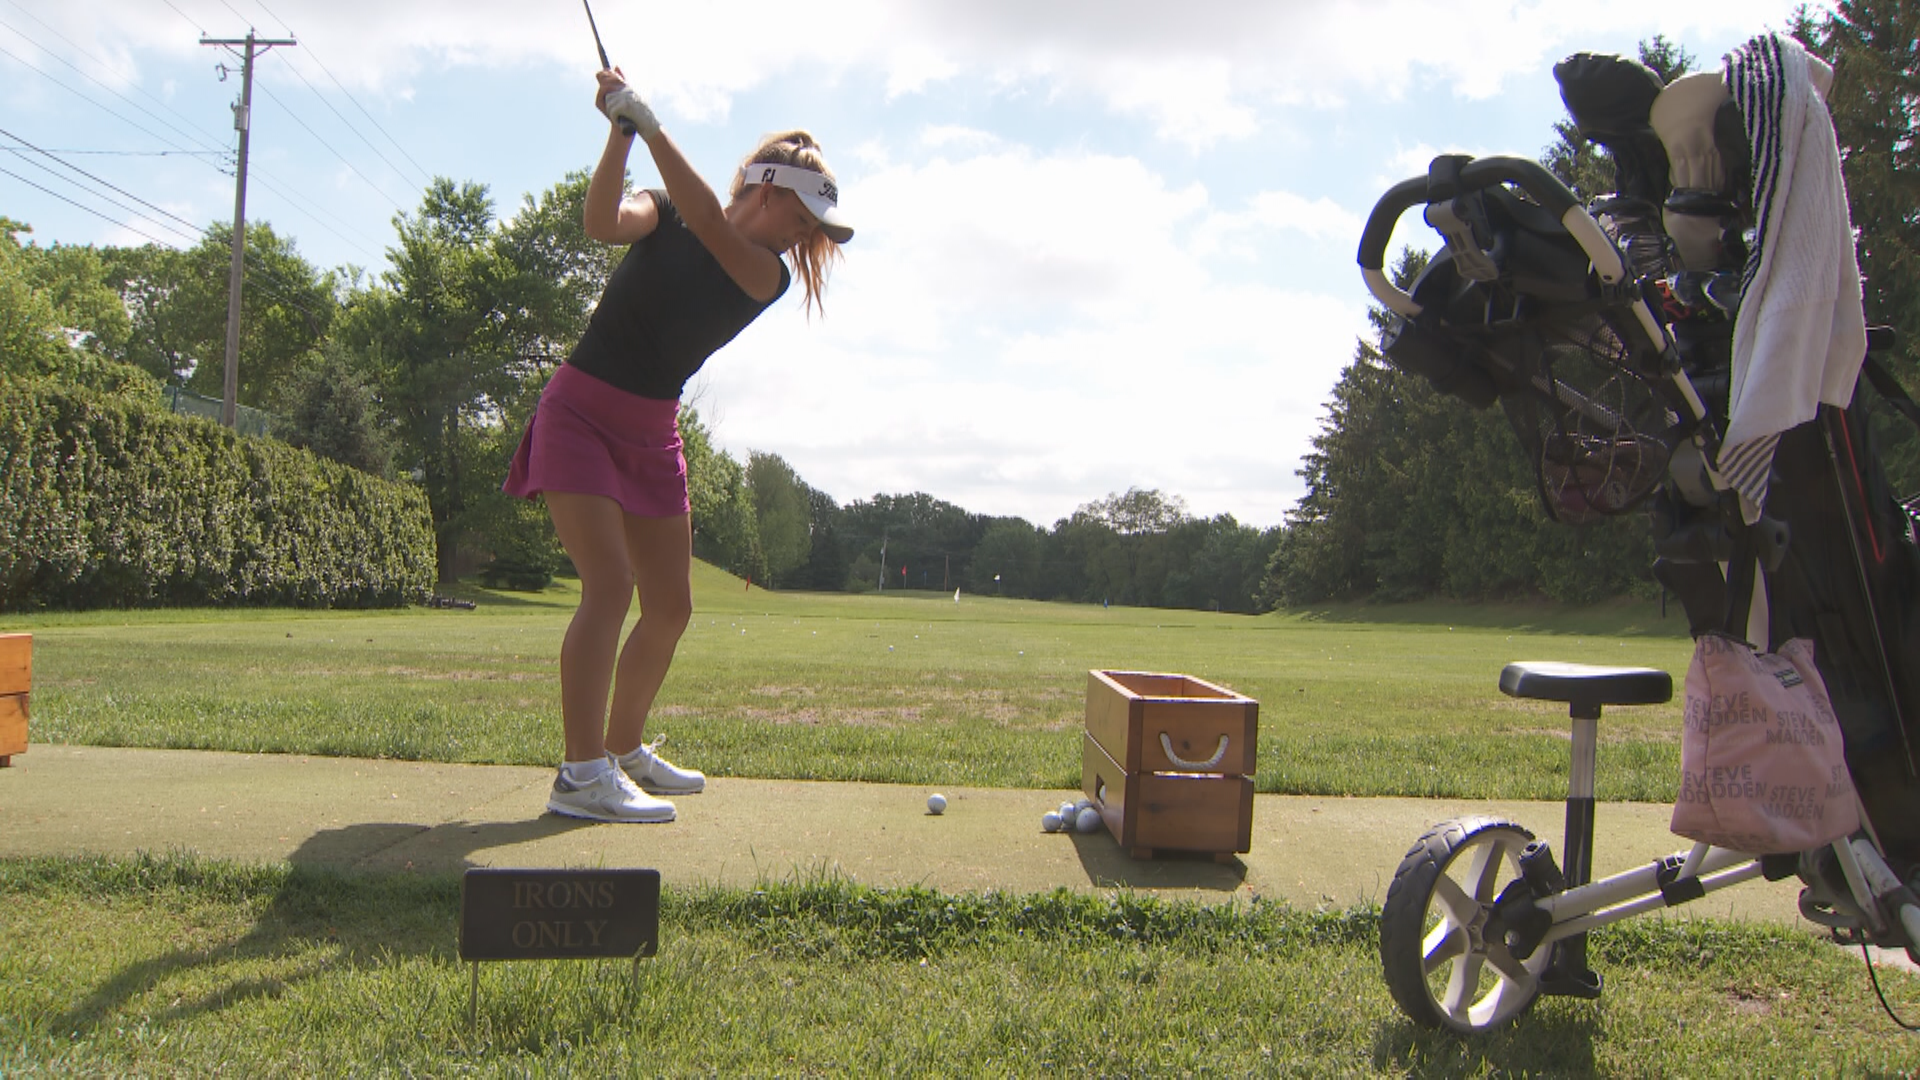 17-year-old Bella McCauley finished second in a U.S. Open qualifier last month to earn a trip to the LPGA event starting Thursday in San Francisco.